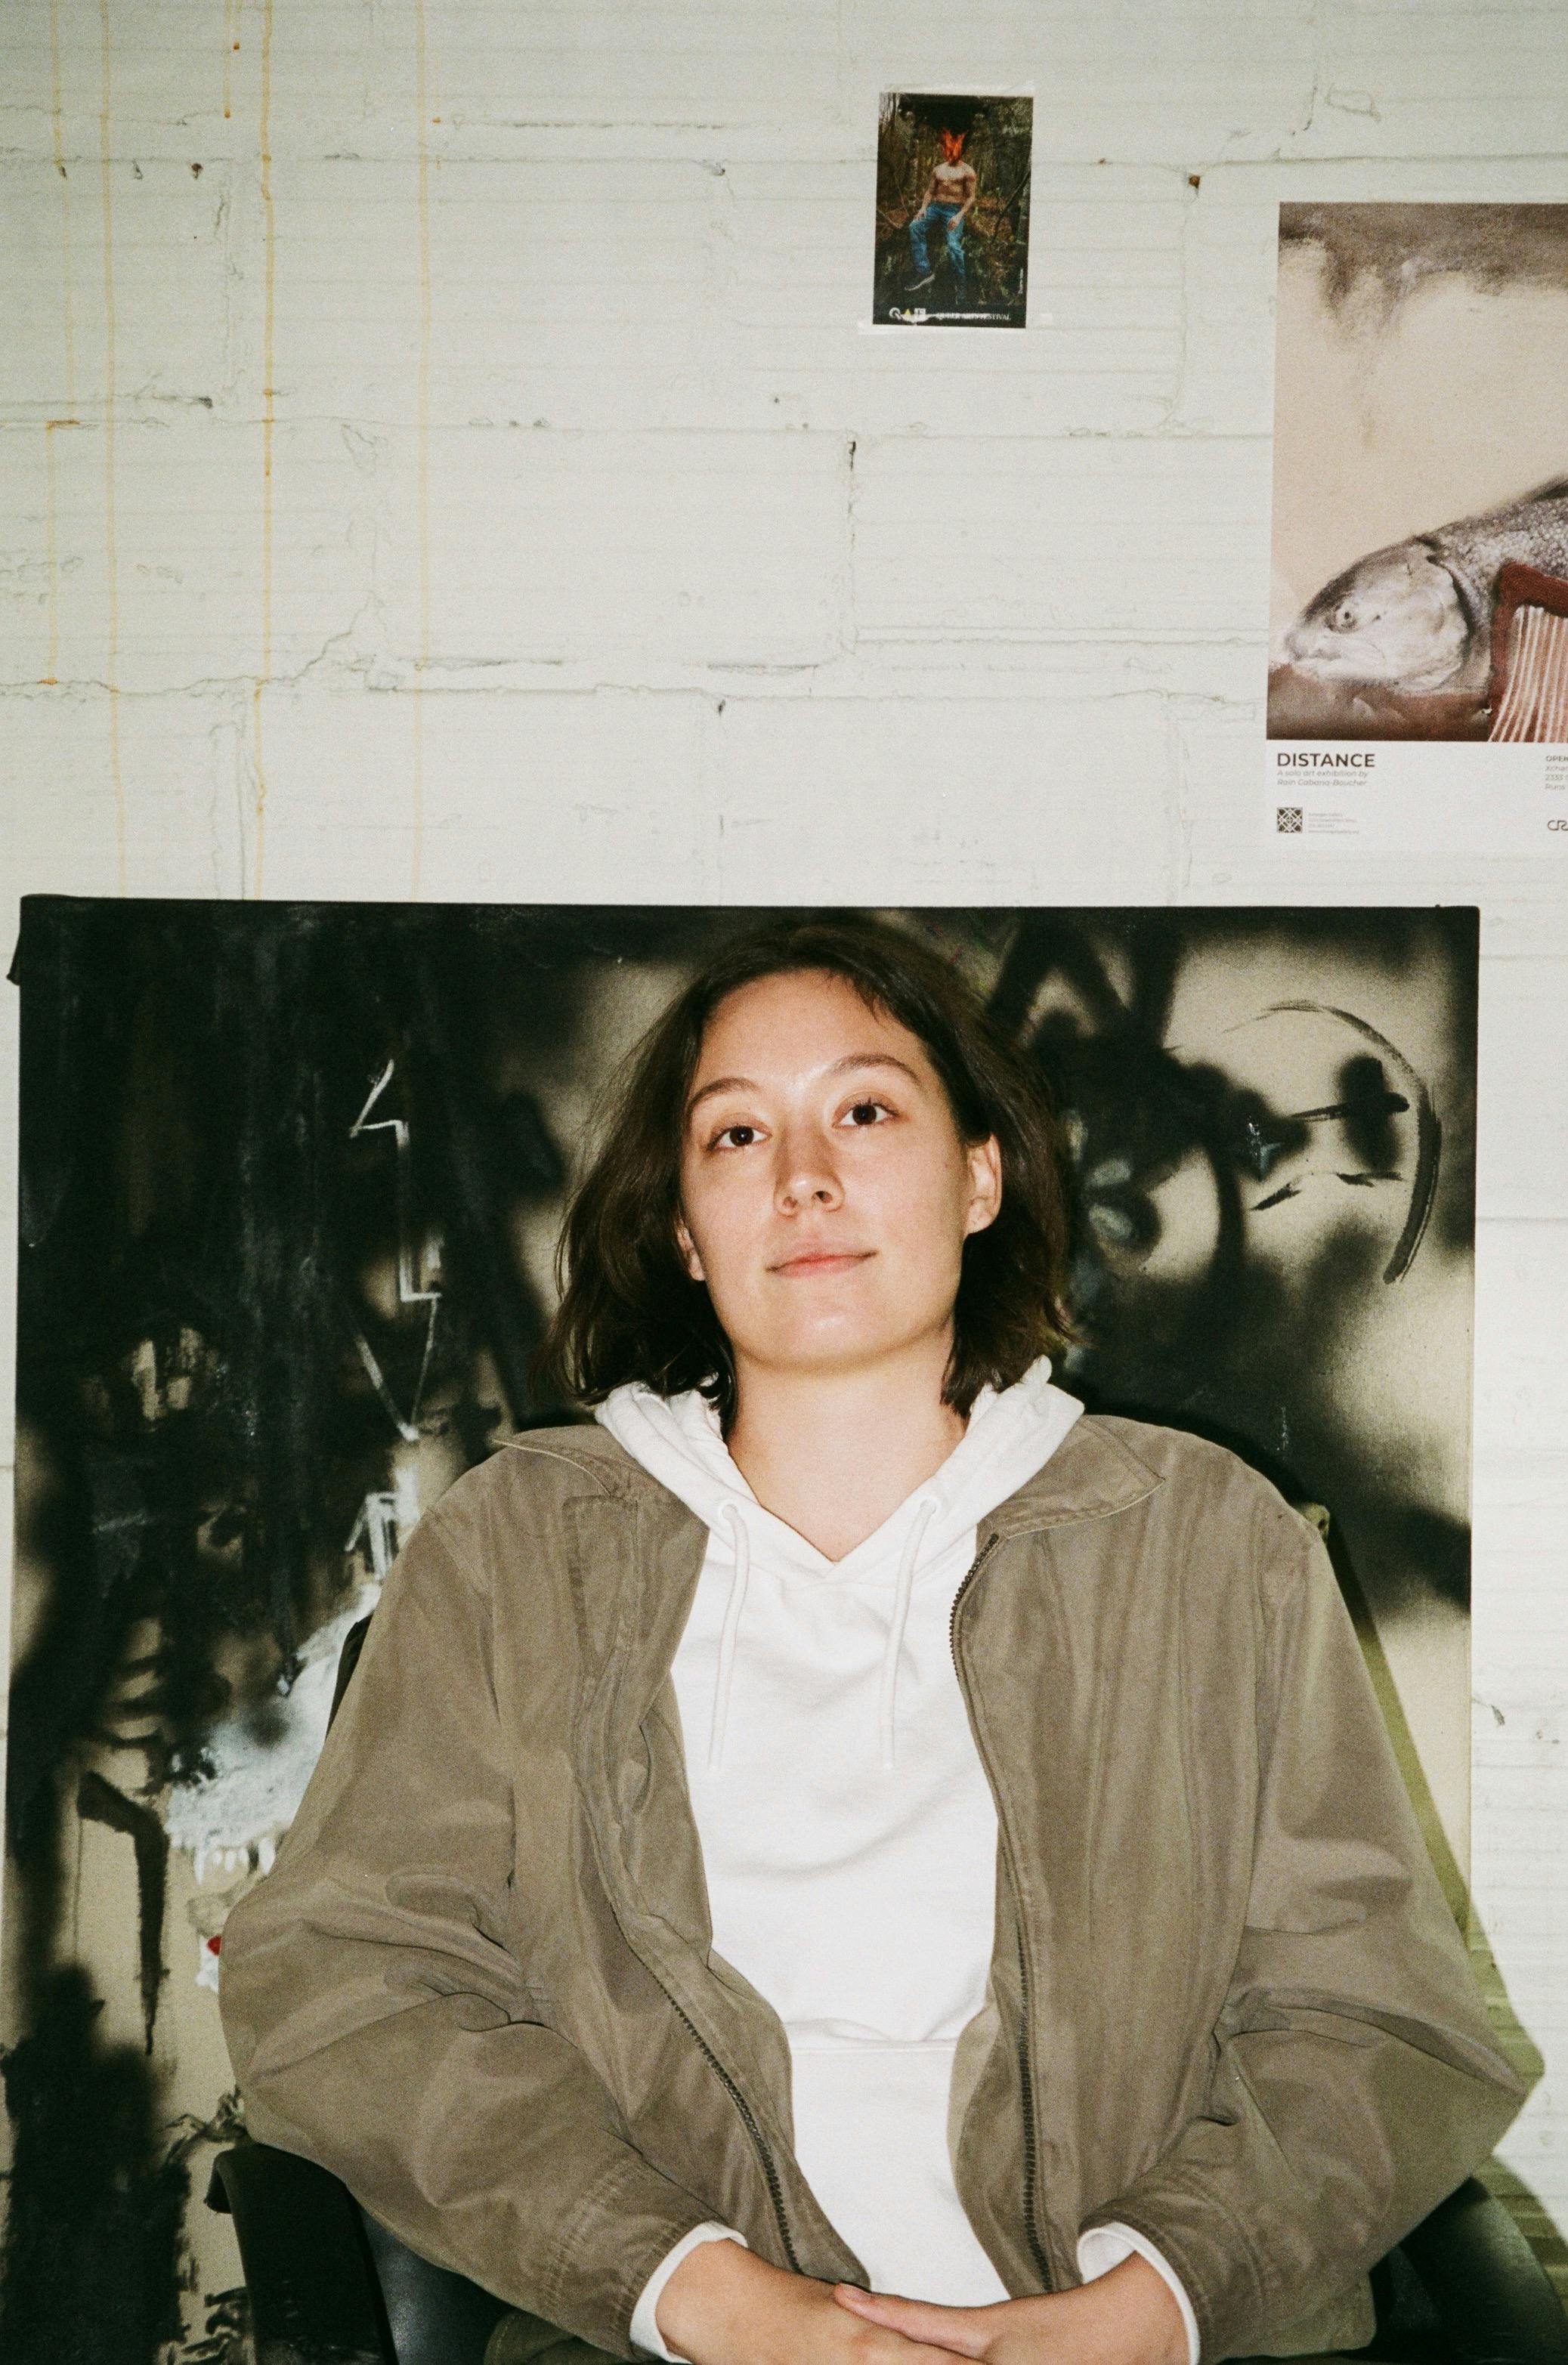 A portrait of Rain Cabana-Boucher. She is seated in front of a black and white painting hung on a white brick wall, on which two smaller images hang.